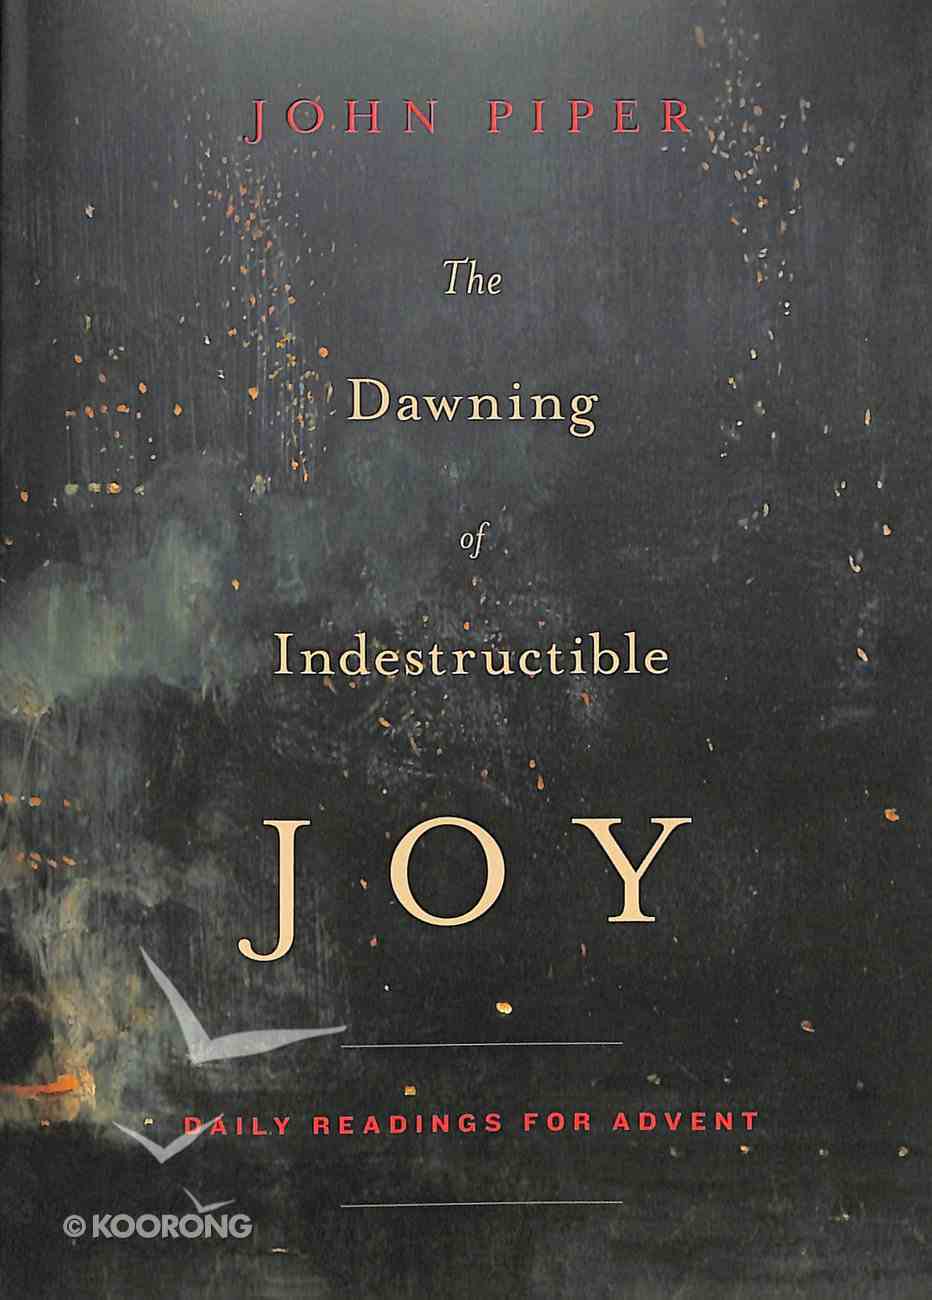 The Dawning of Indestructible Joy: Daily Readings For Advent Paperback